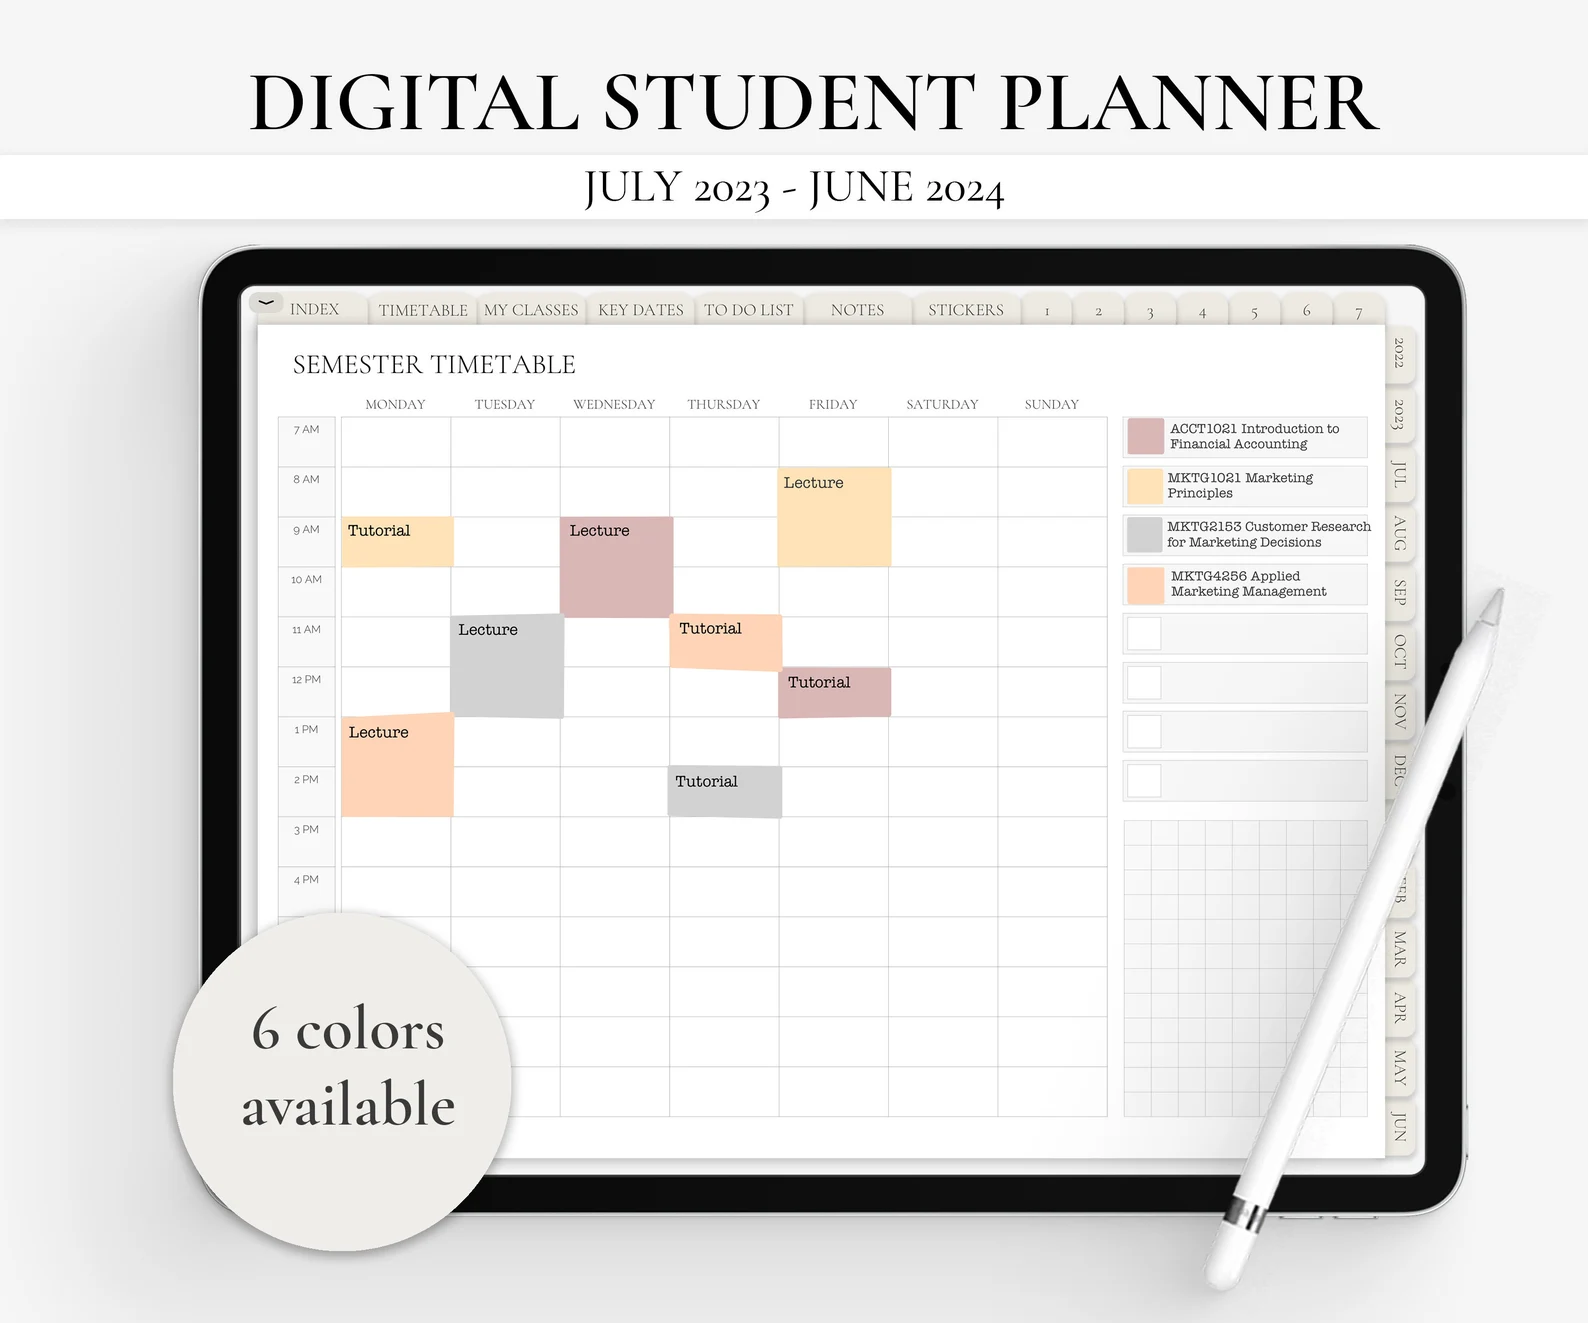 An iPad showing the semester timetable feature from ThrivingPlanners’ Digital Student Planner